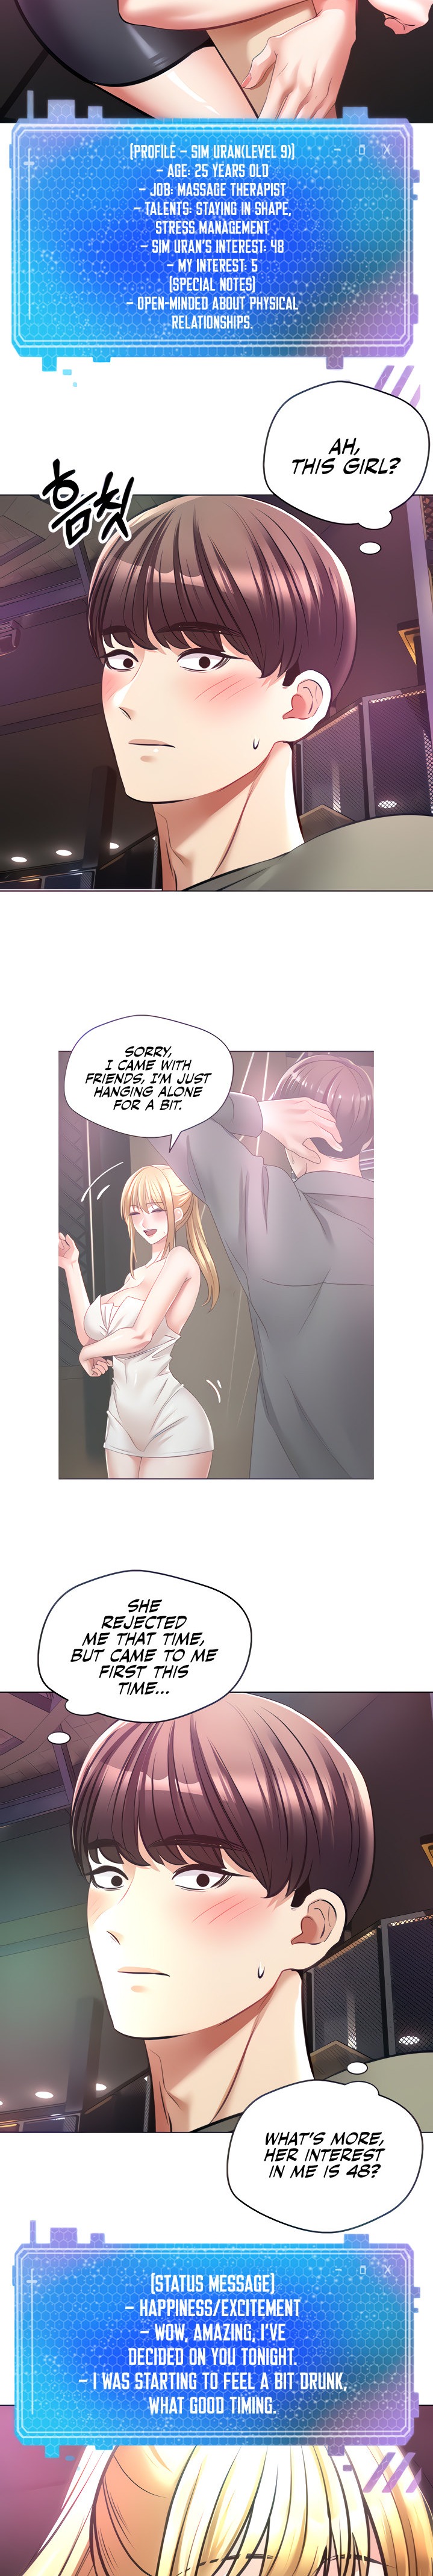 Desire Realization App - Chapter 8 Page 5